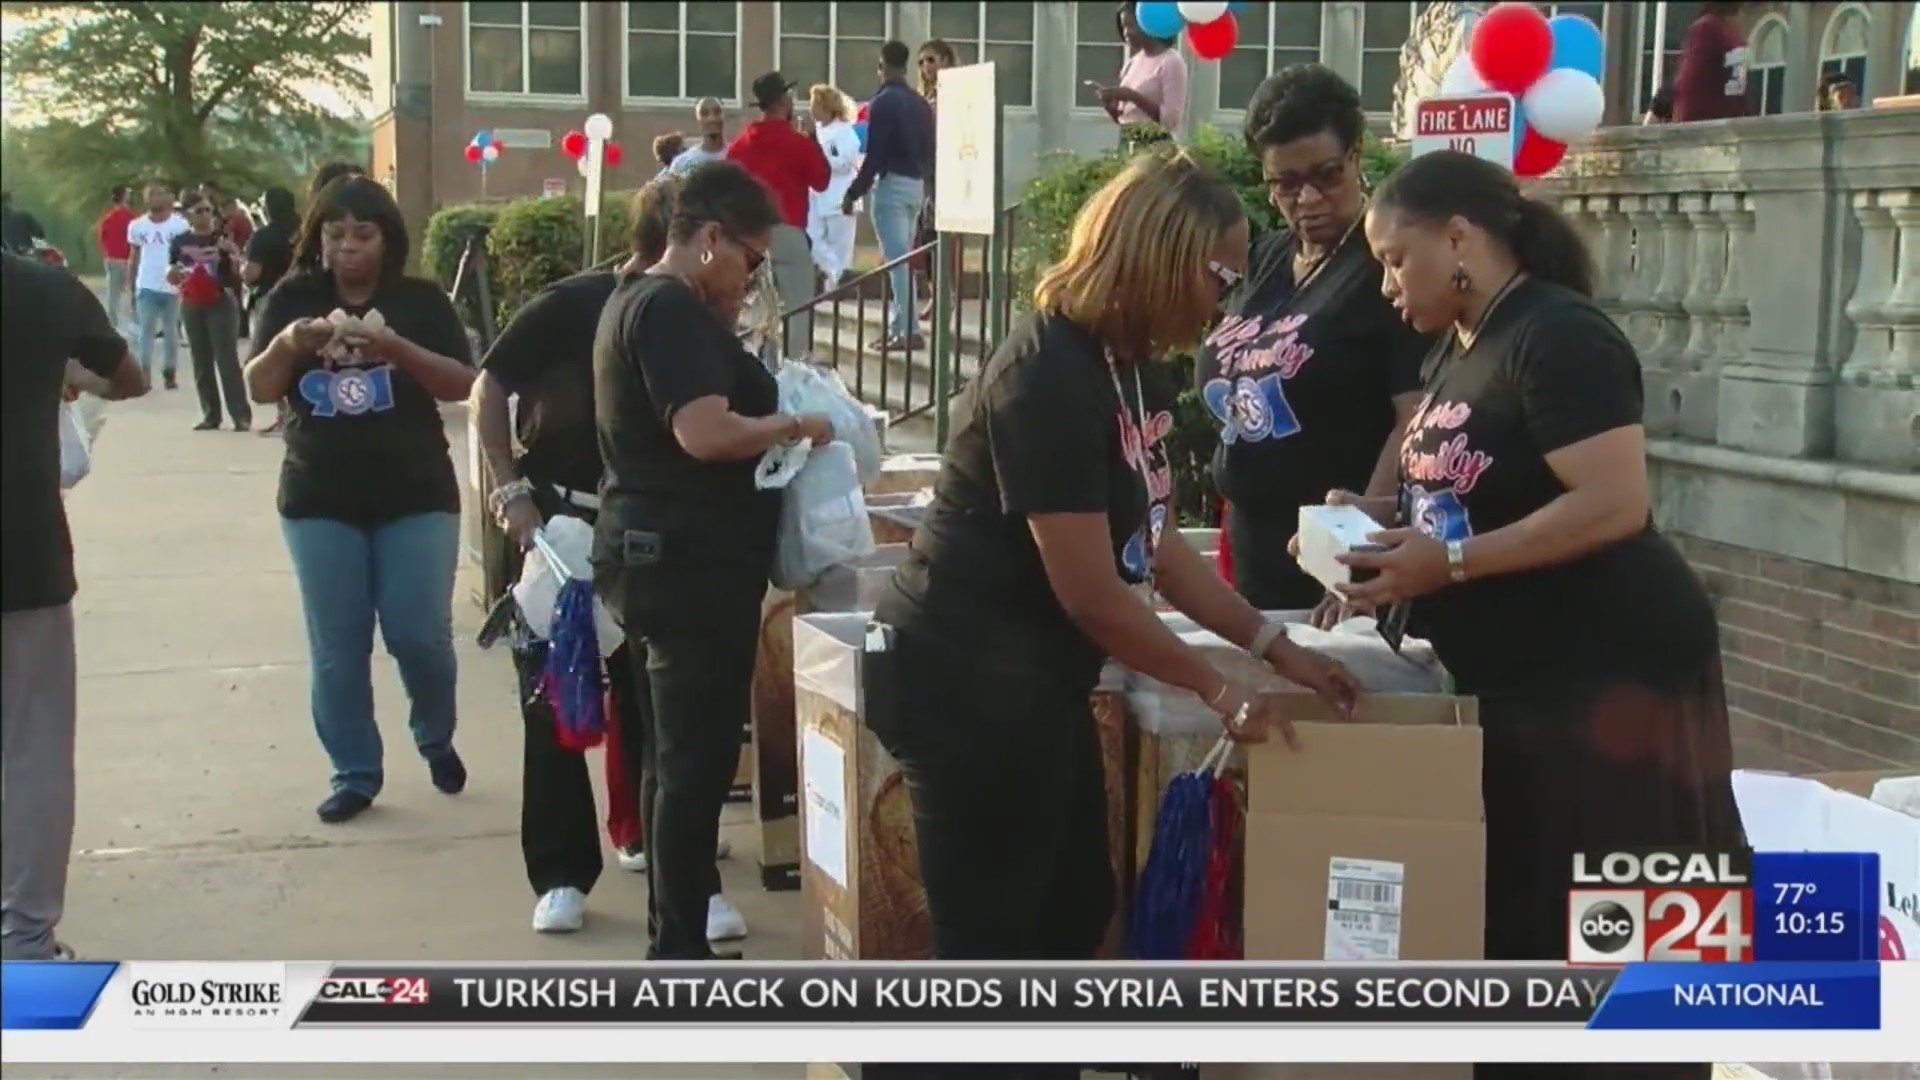 “Necessity Drive" held for feminine hygiene products, toiletries, for SCS schools